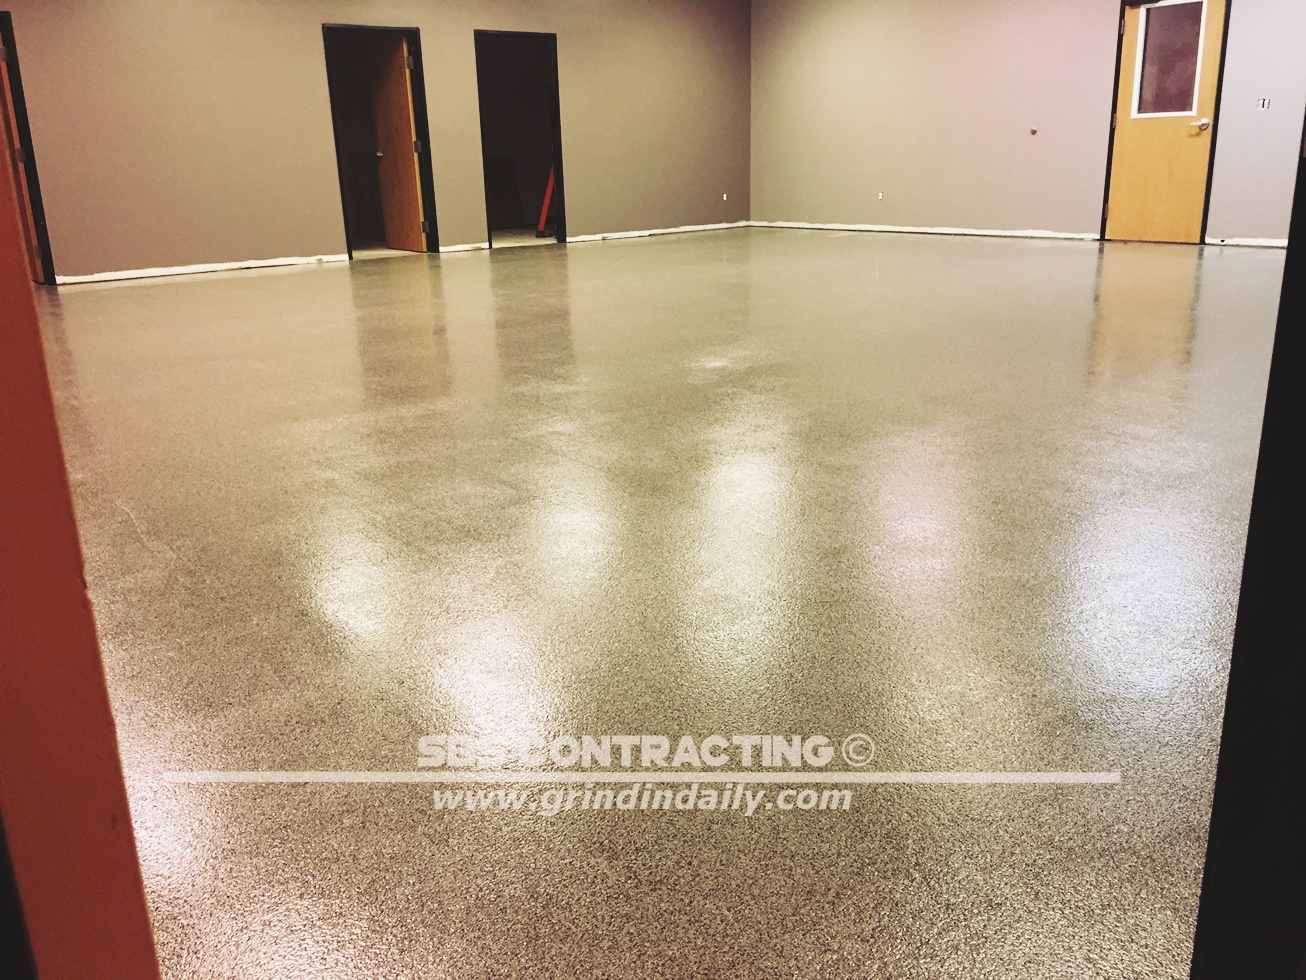 SBS-Contracting-Epoxy-Project-10-01